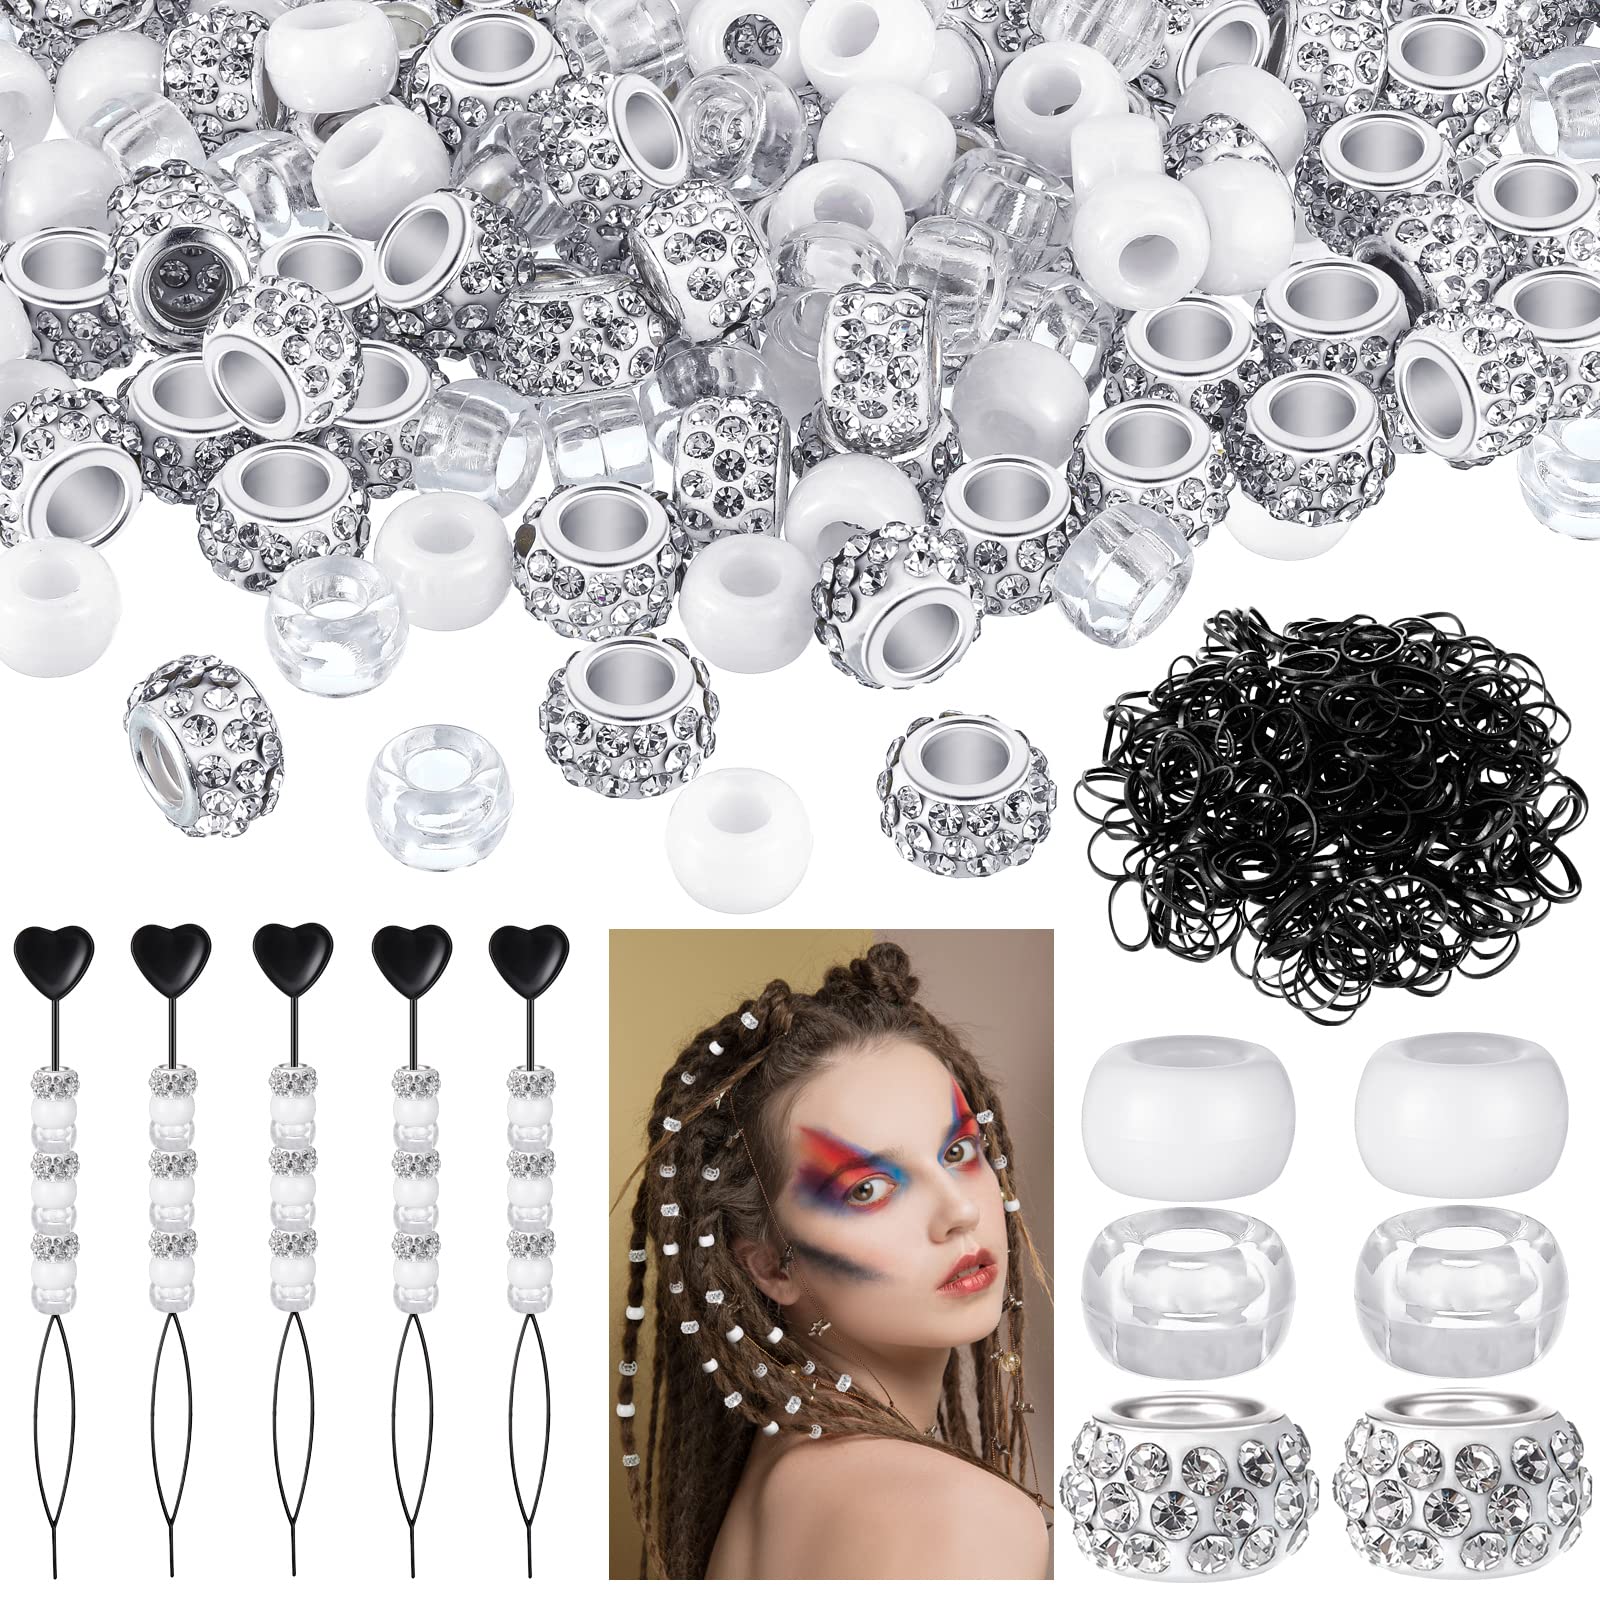 1355 Pieces Diamond Beads Clear Beads for Hair Braids 100 11 mm Large Hole  Rhinestone European Style Beads 800 Clear Pony Beads 450 Black Elastic Hair  Bands 5 Quick Beader for Women Girls Hair Braids